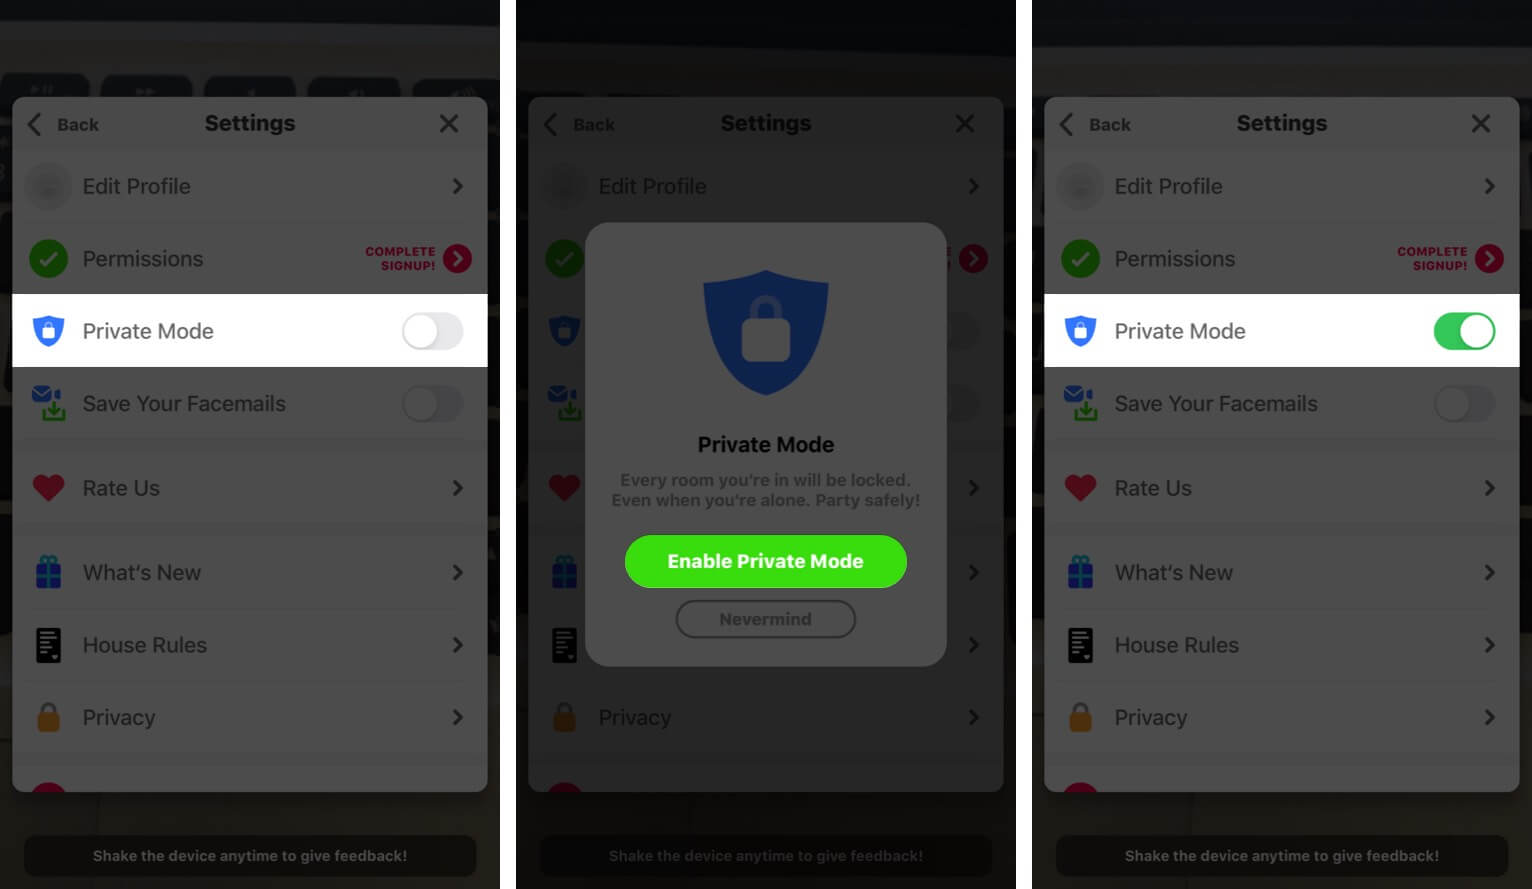 Turn ON Private Mode in Houseparty App on iPhone